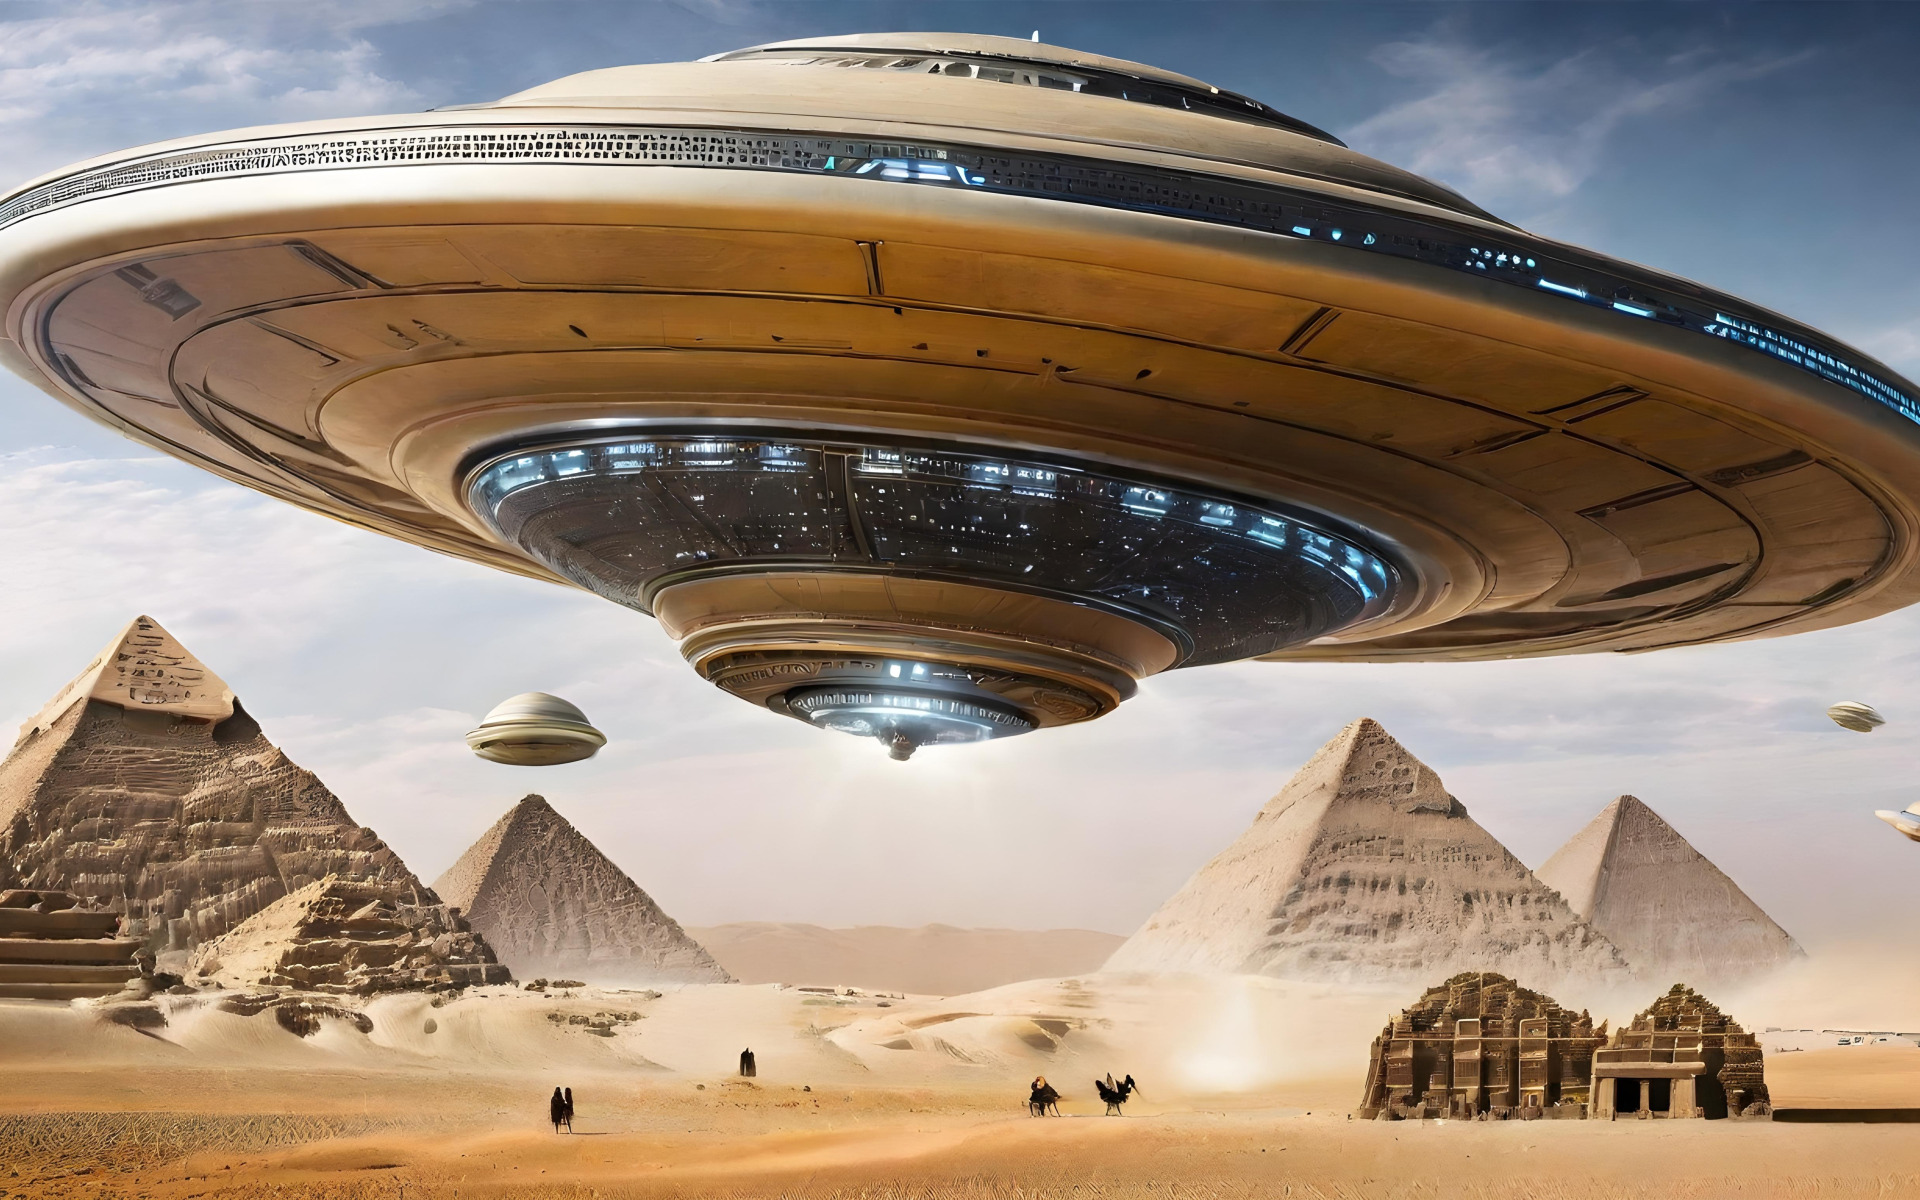 A flying saucer over the pyramids.